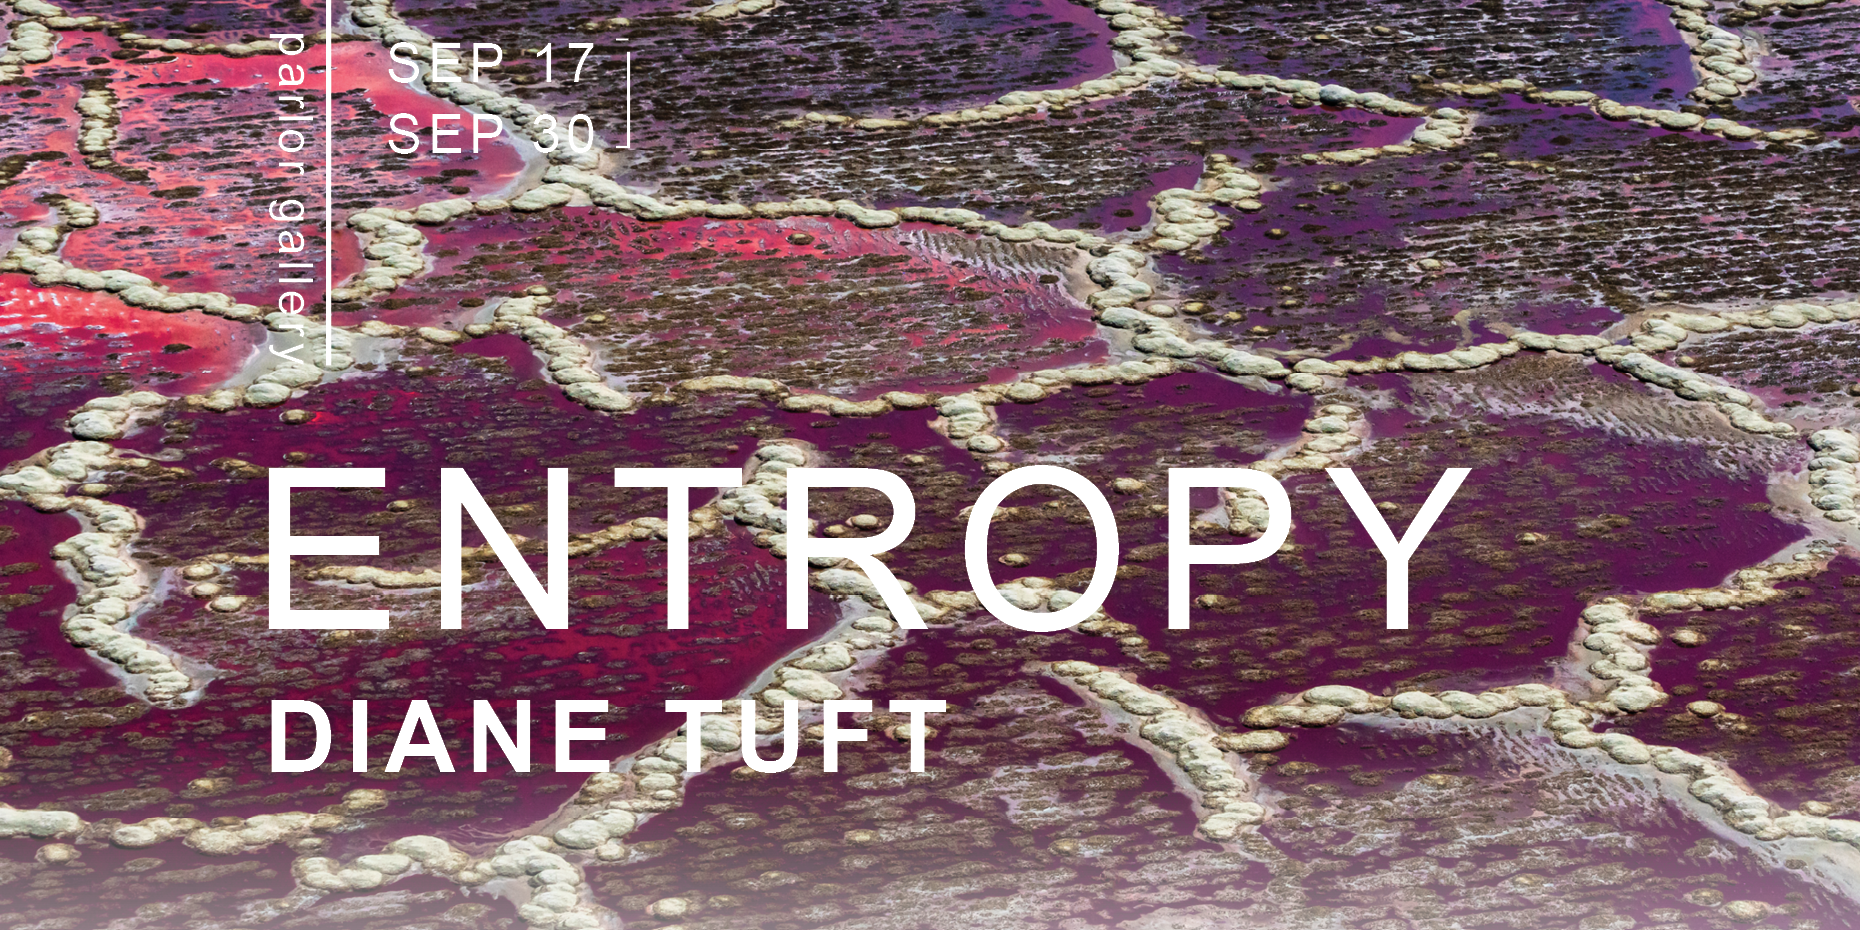 Details for the 2023 Entropy exhibition by Diane Tuft.